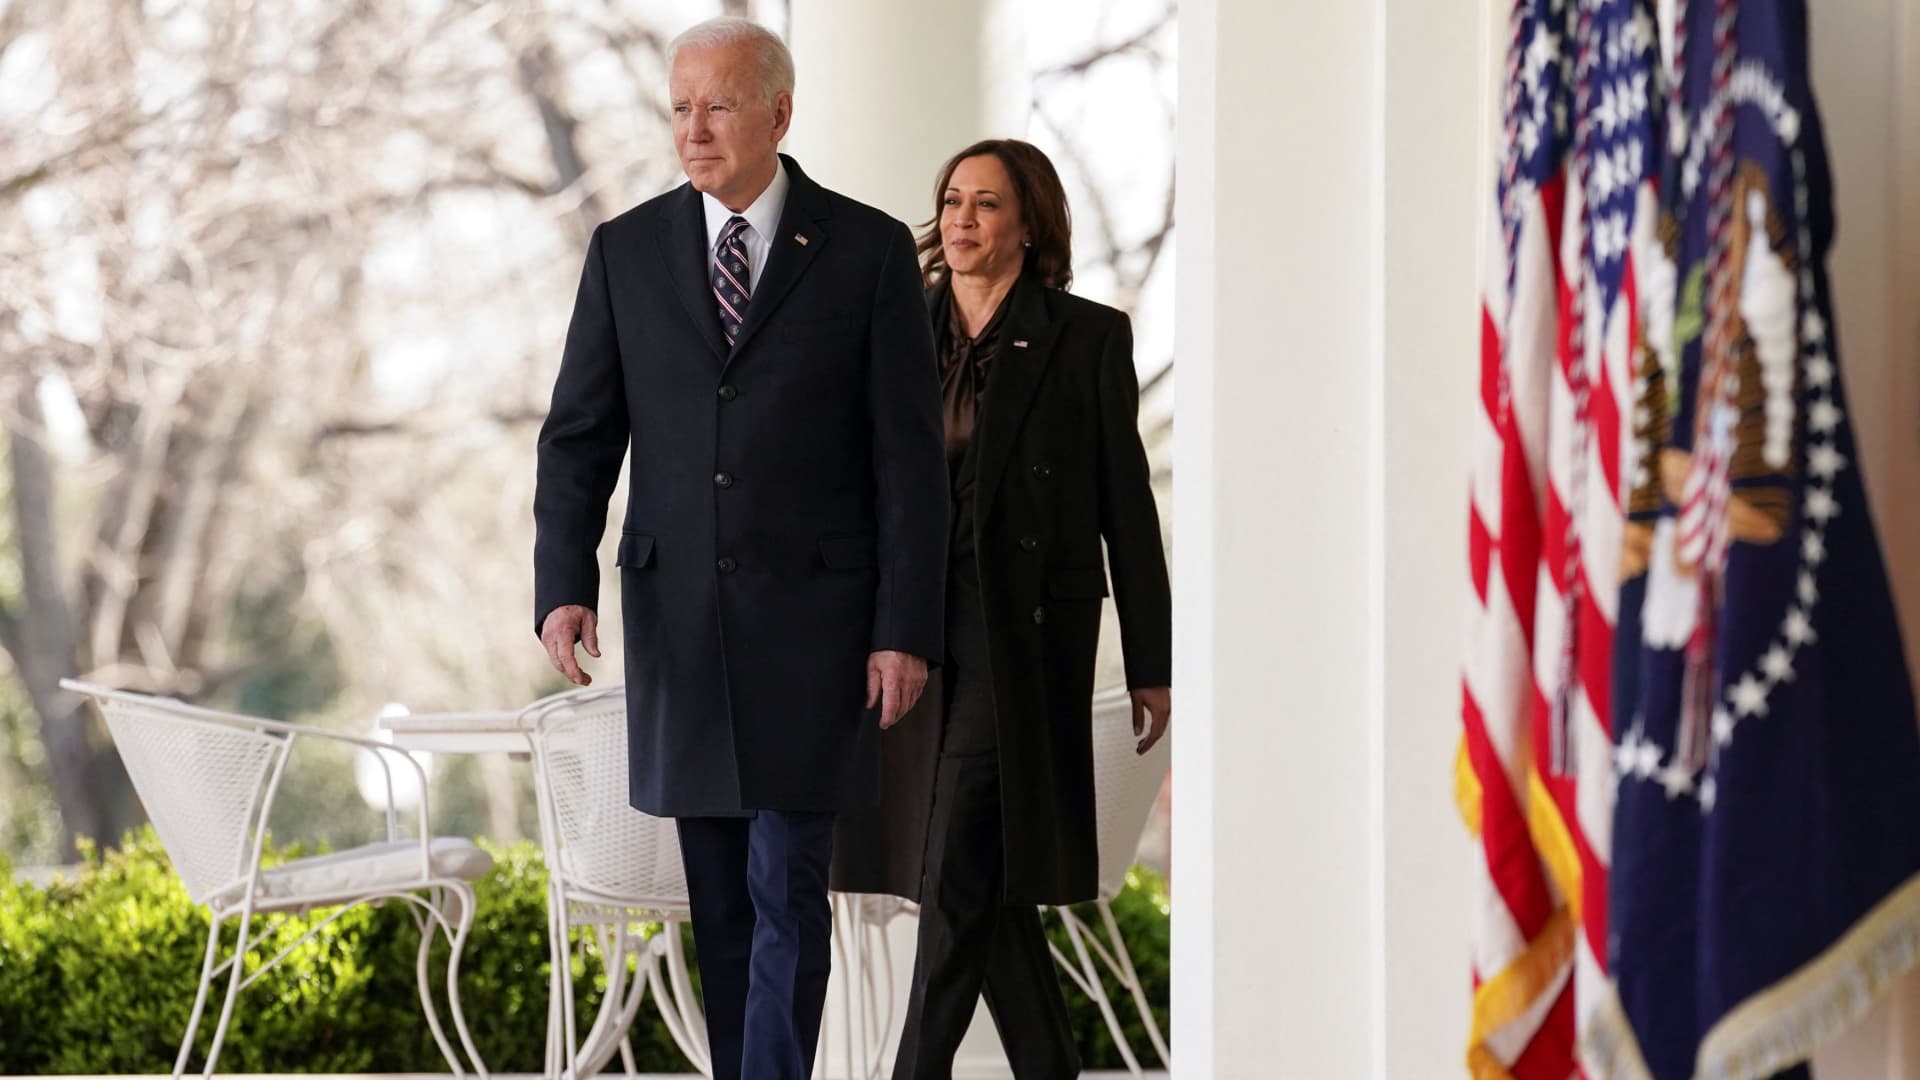 Harris, Newsom engage with donors as possible 2024 bids loom if Biden doesn’t ru..